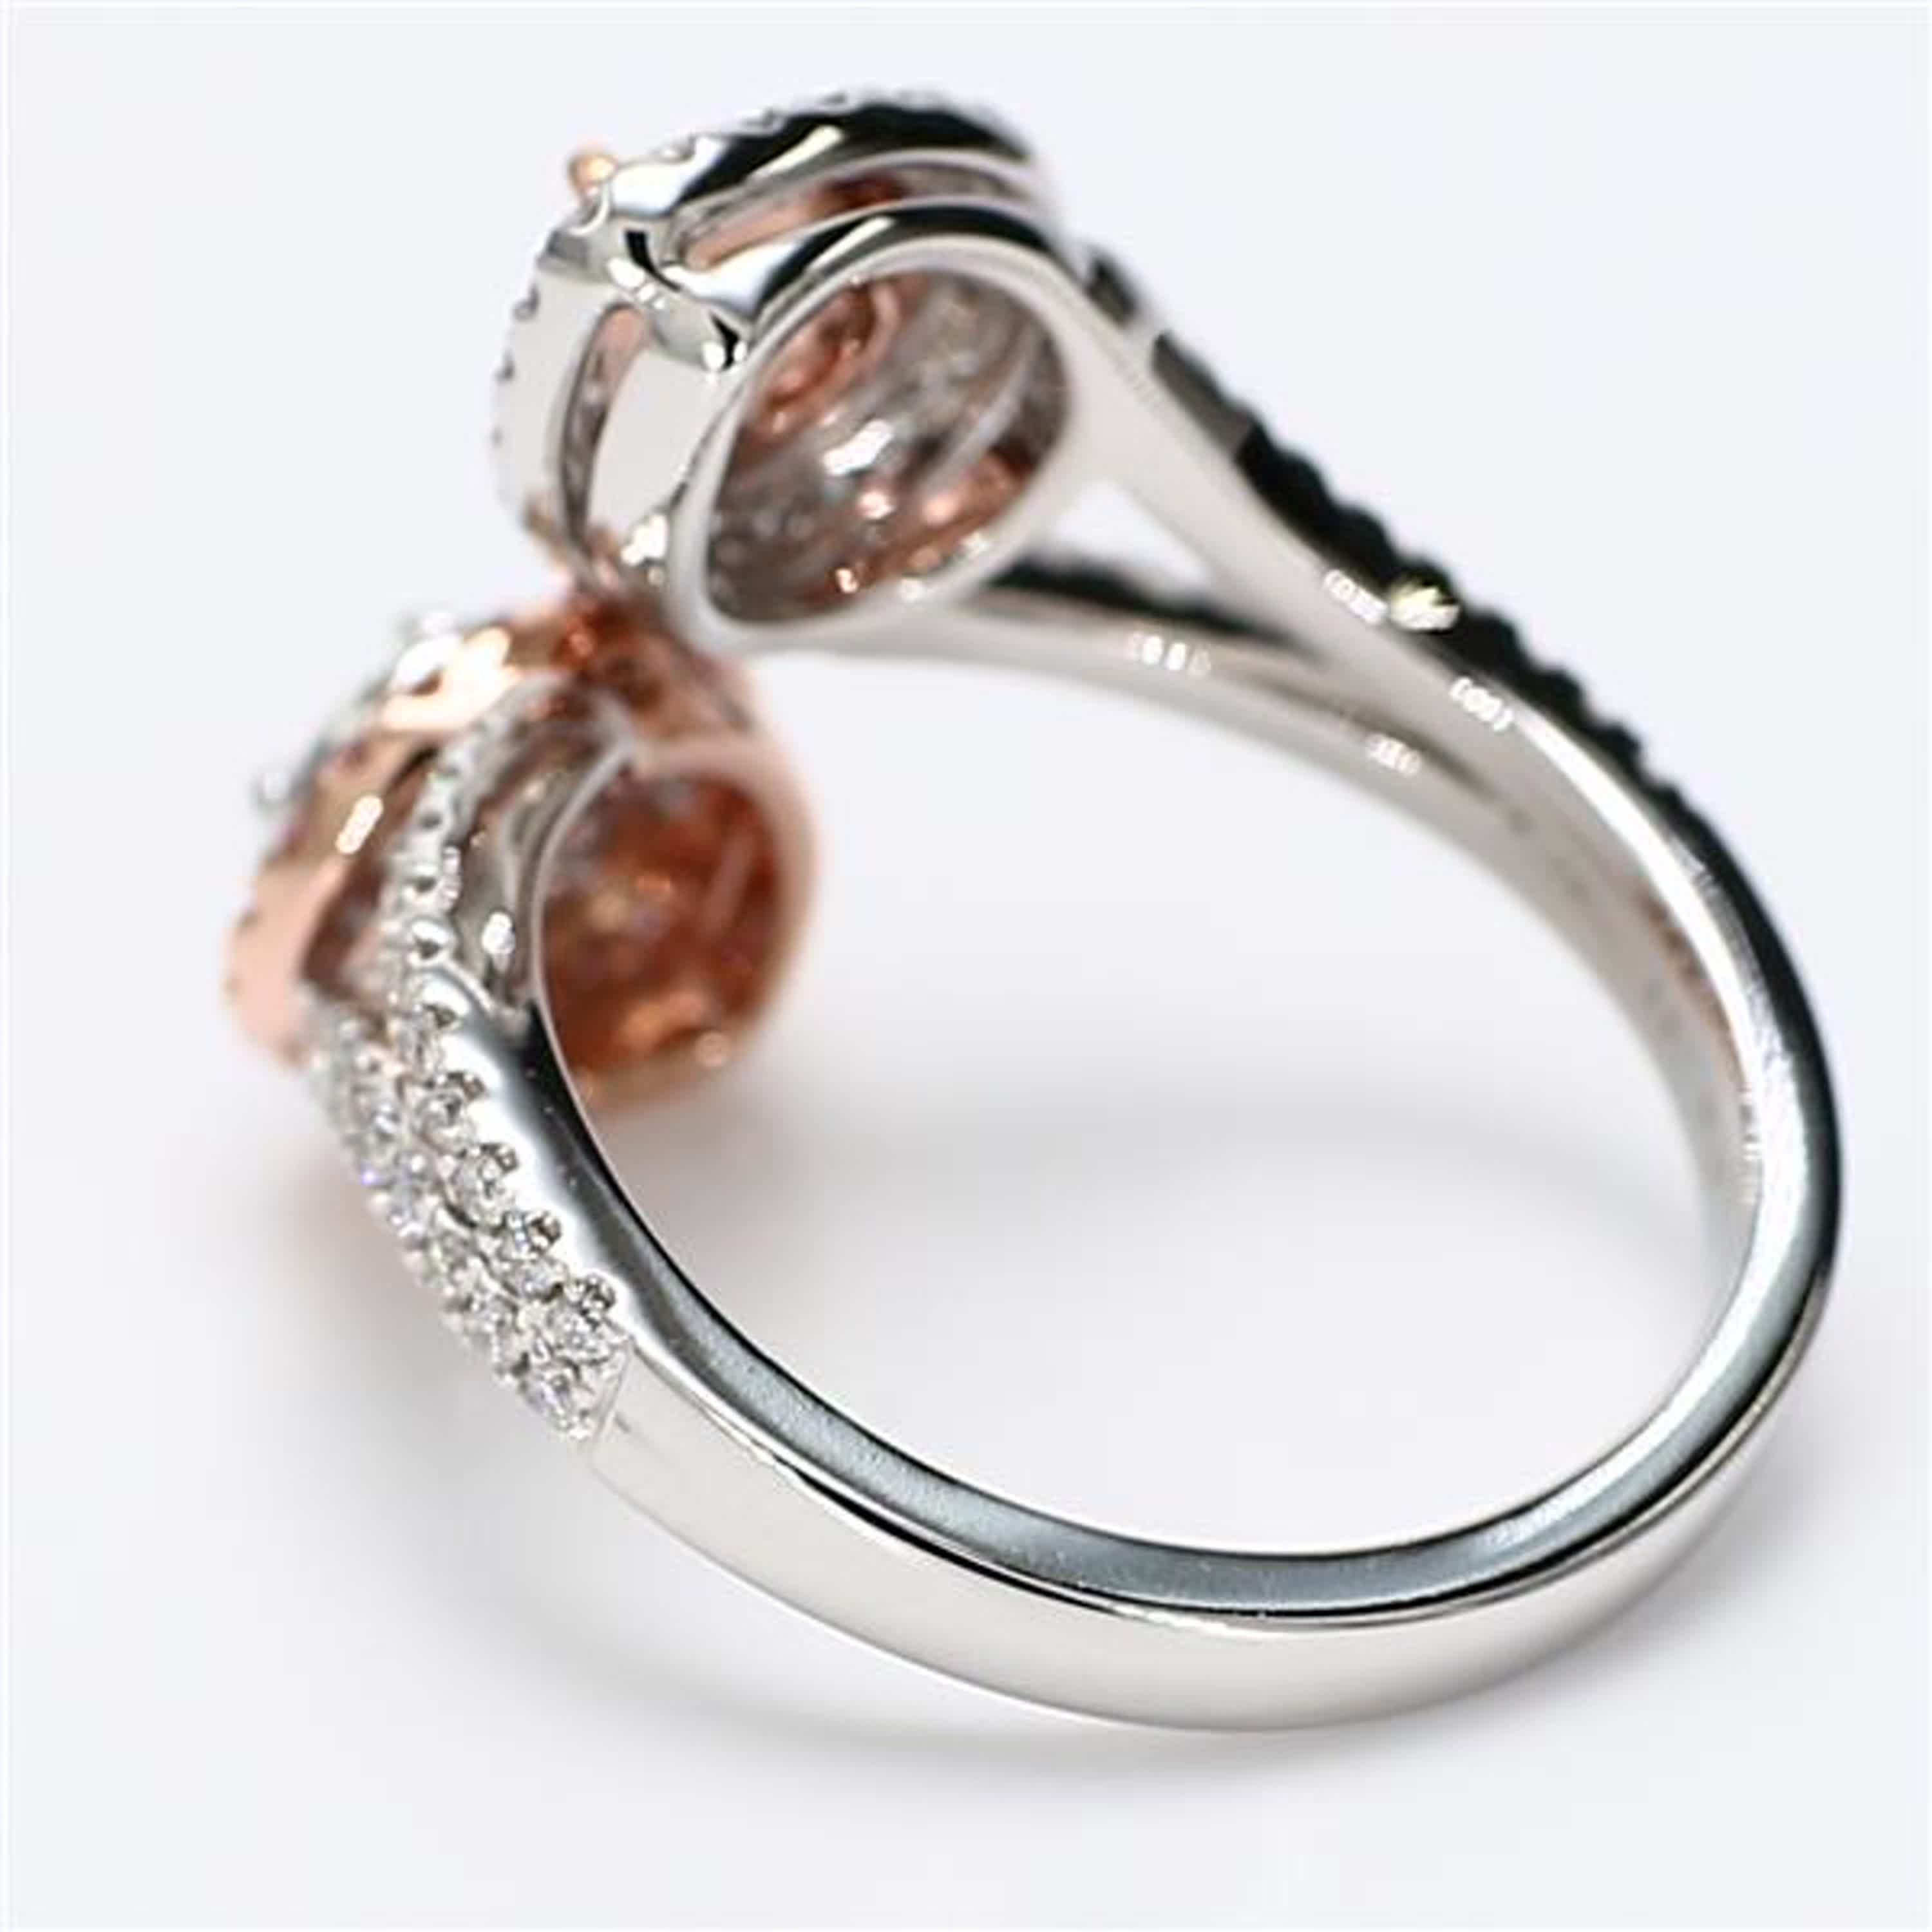 GIA Certified Natural Pink Pear and White Diamond 1.09 Carat TW Rose Gold Ring